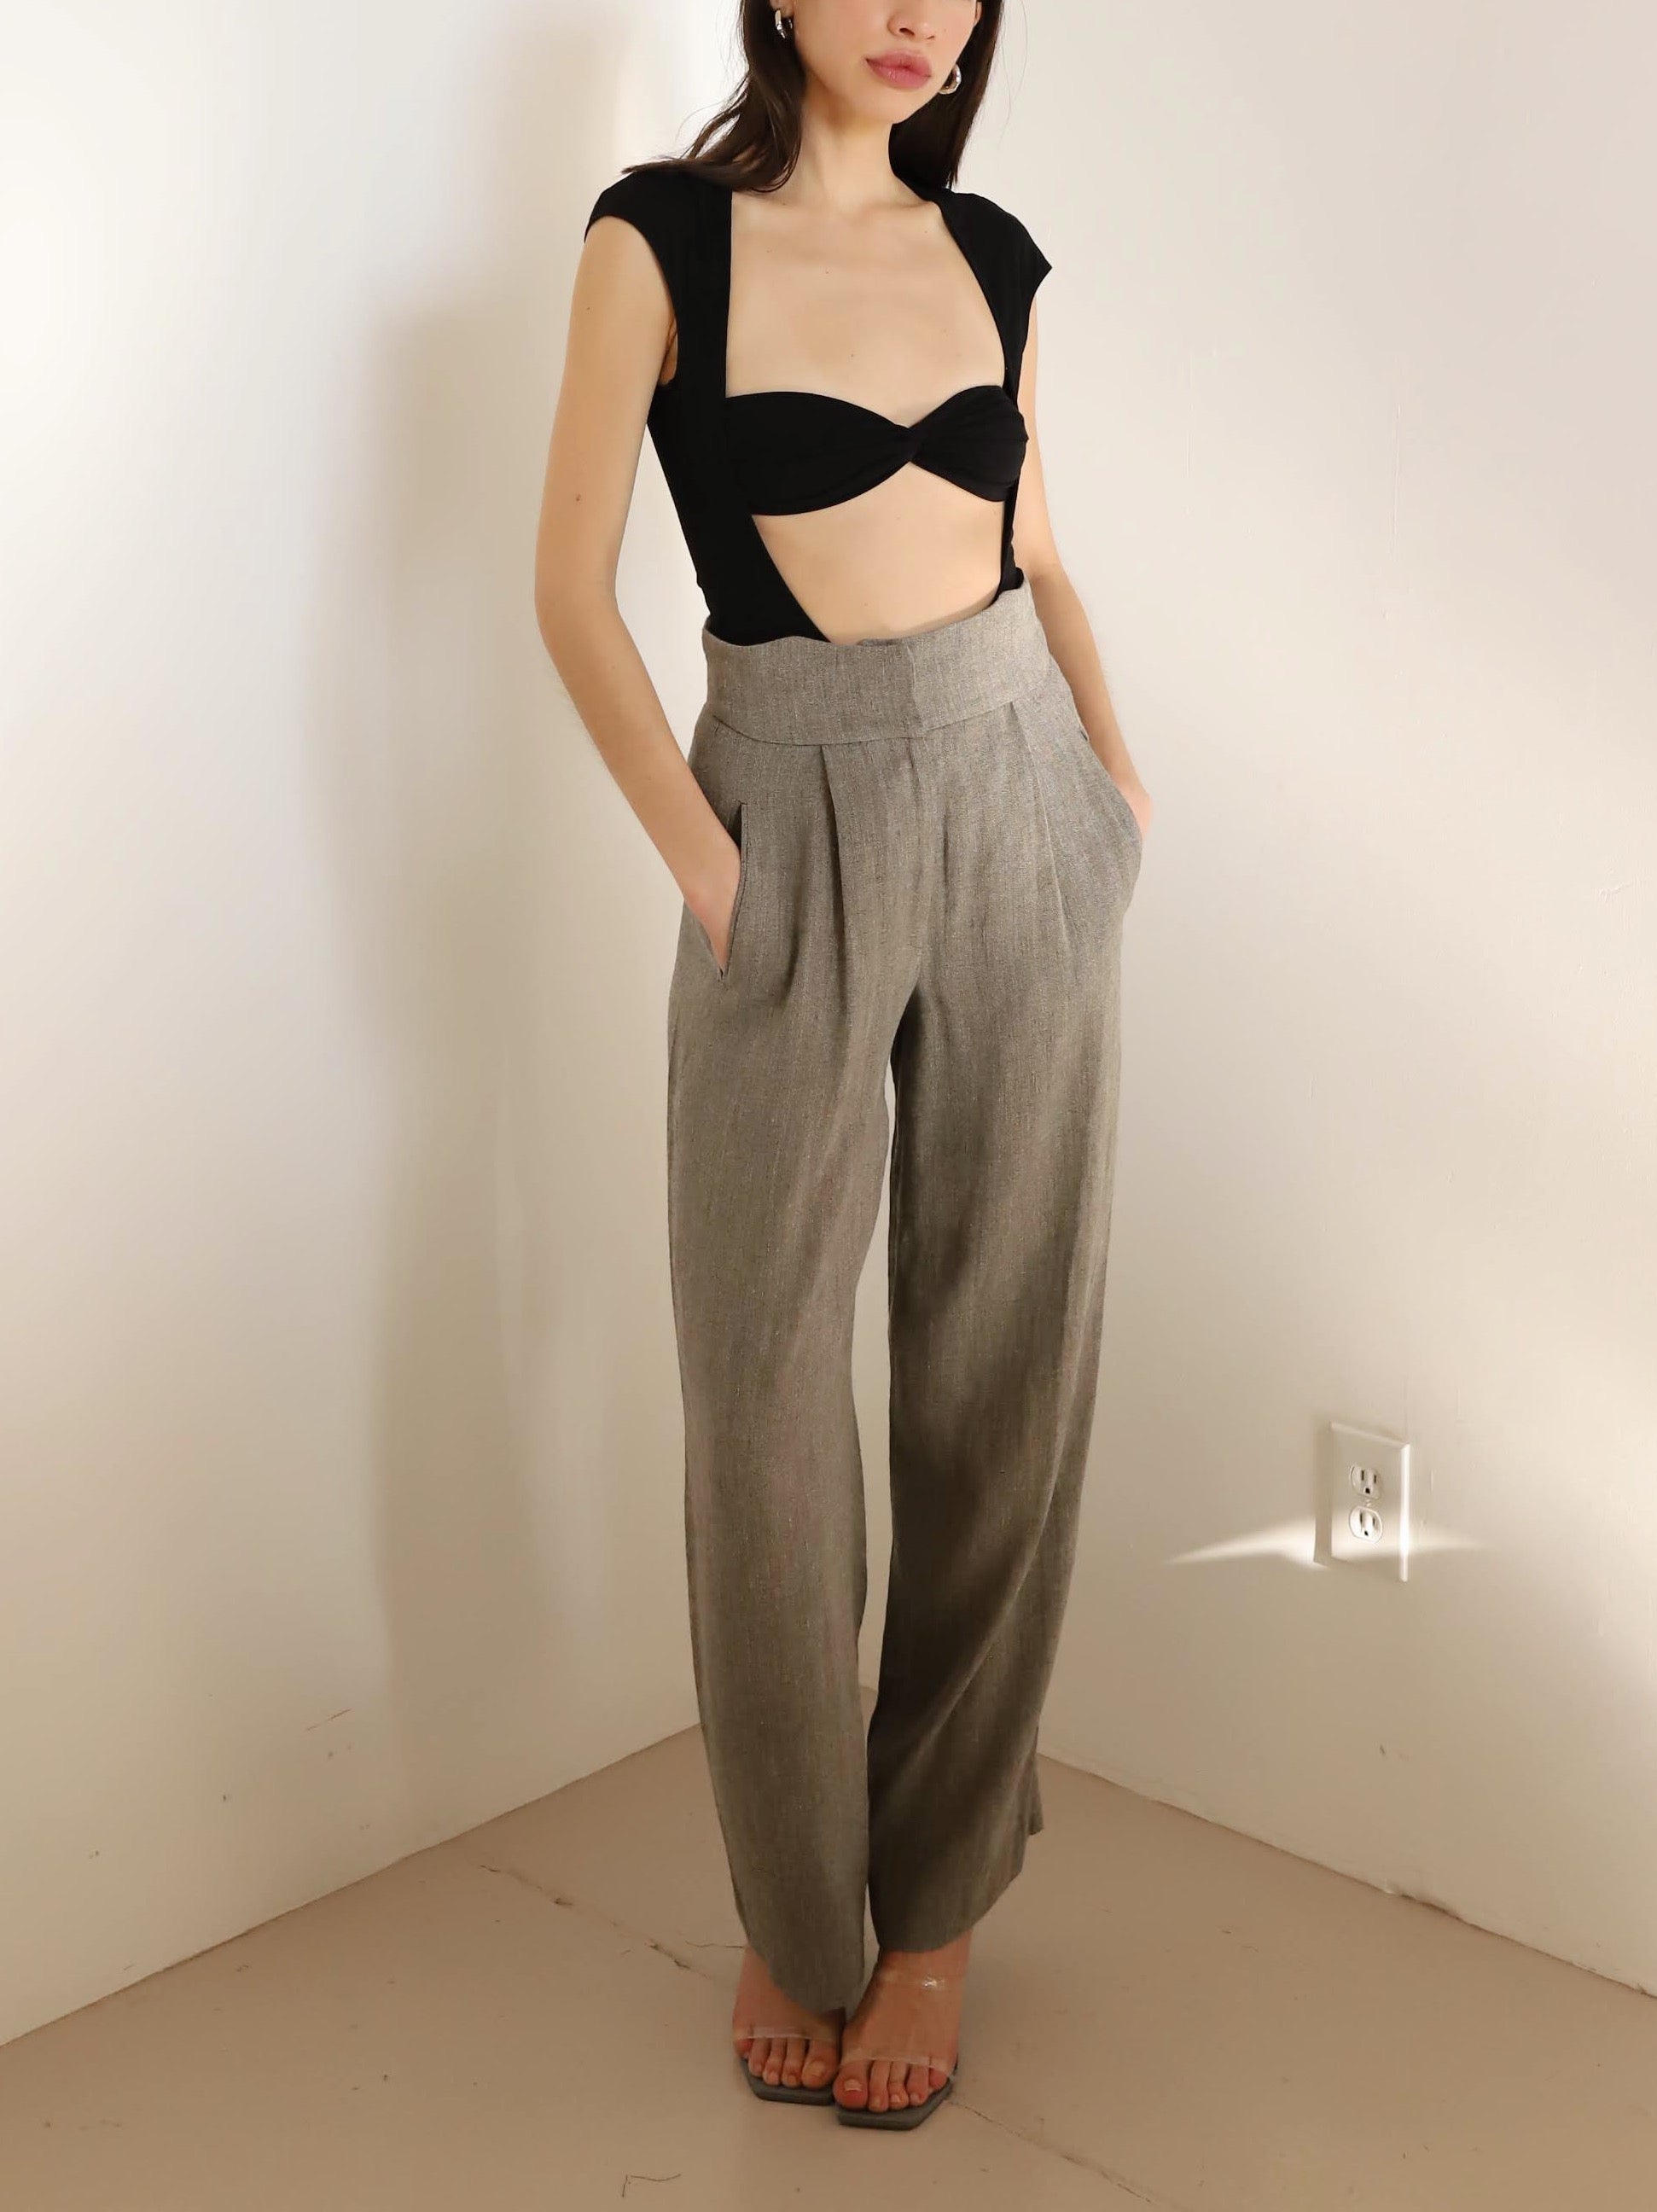 Vintage DKNY Gray Trousers